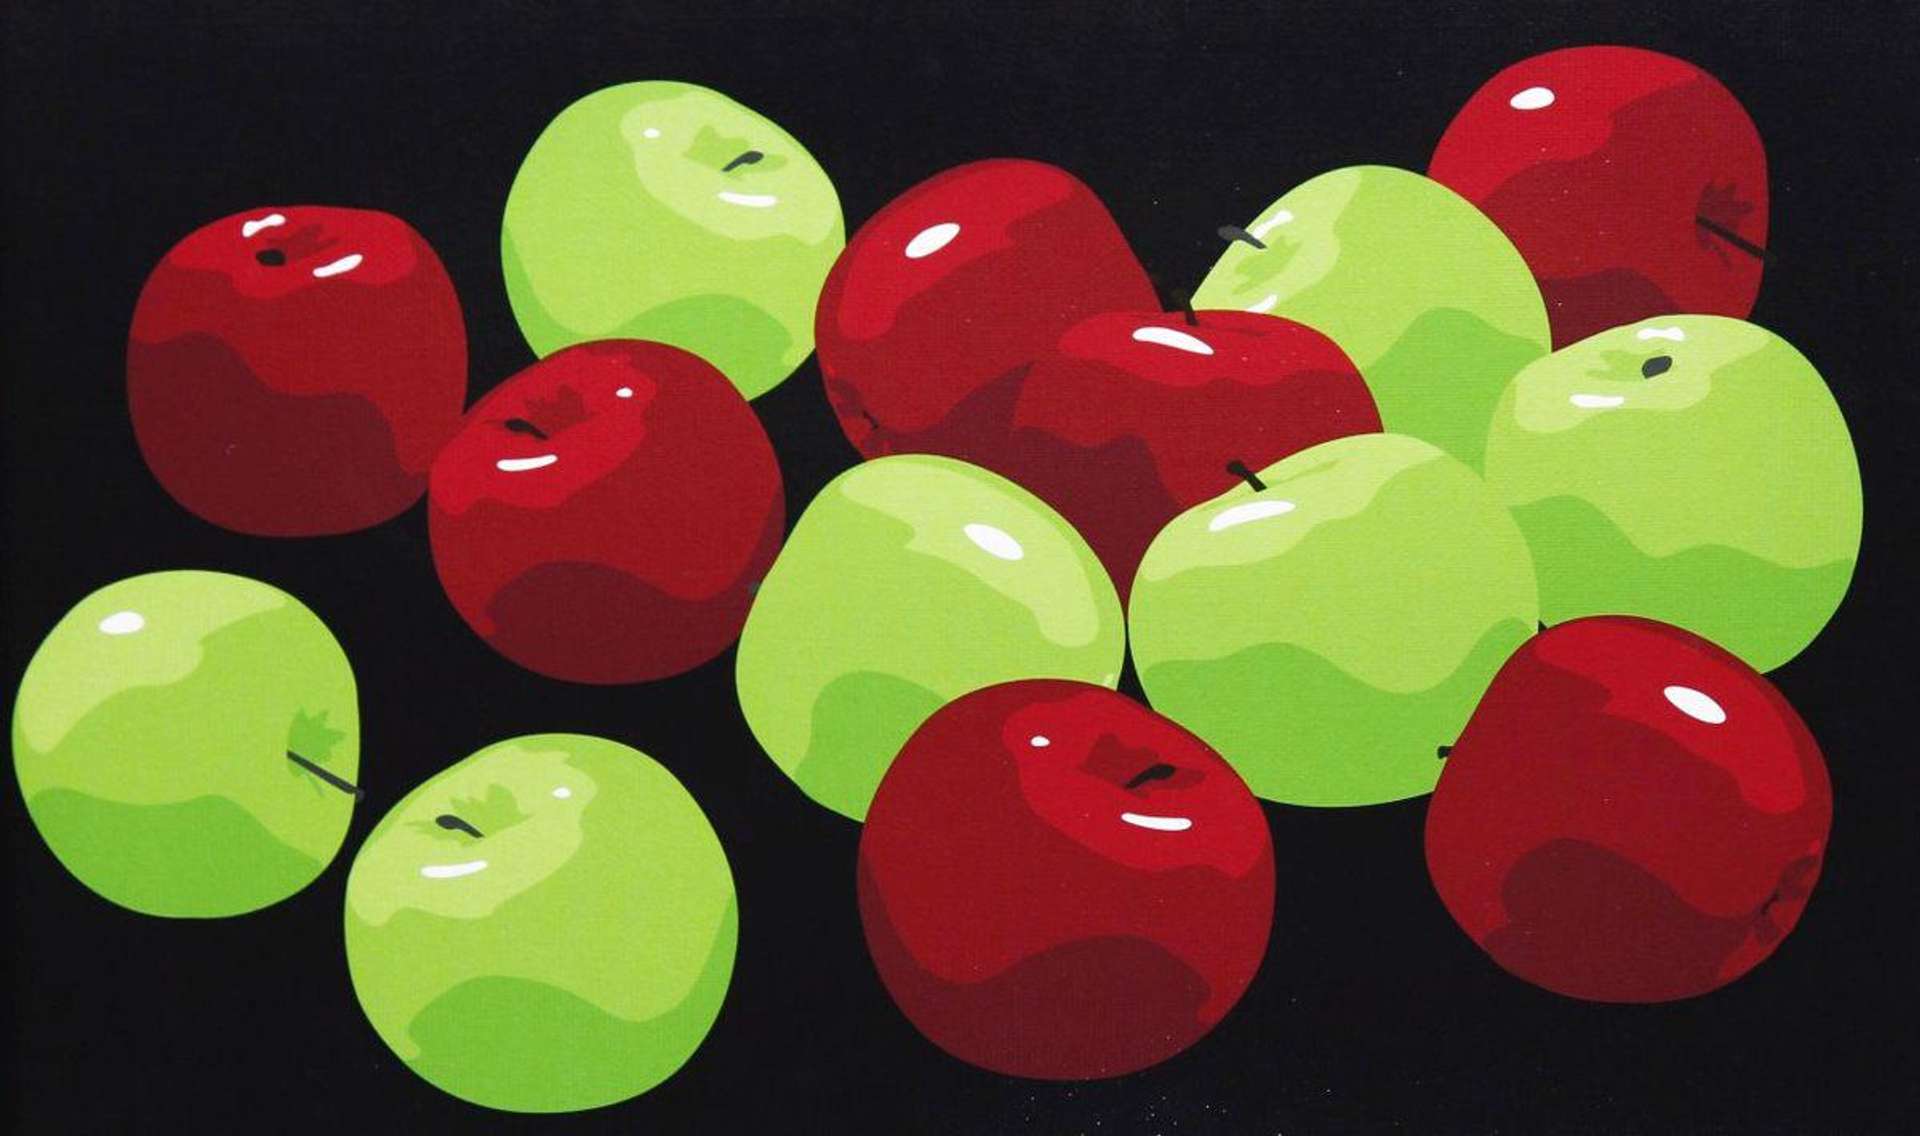 Still Life With Red And Green Apples - Signed Print by Julian Opie 2001 - MyArtBroker